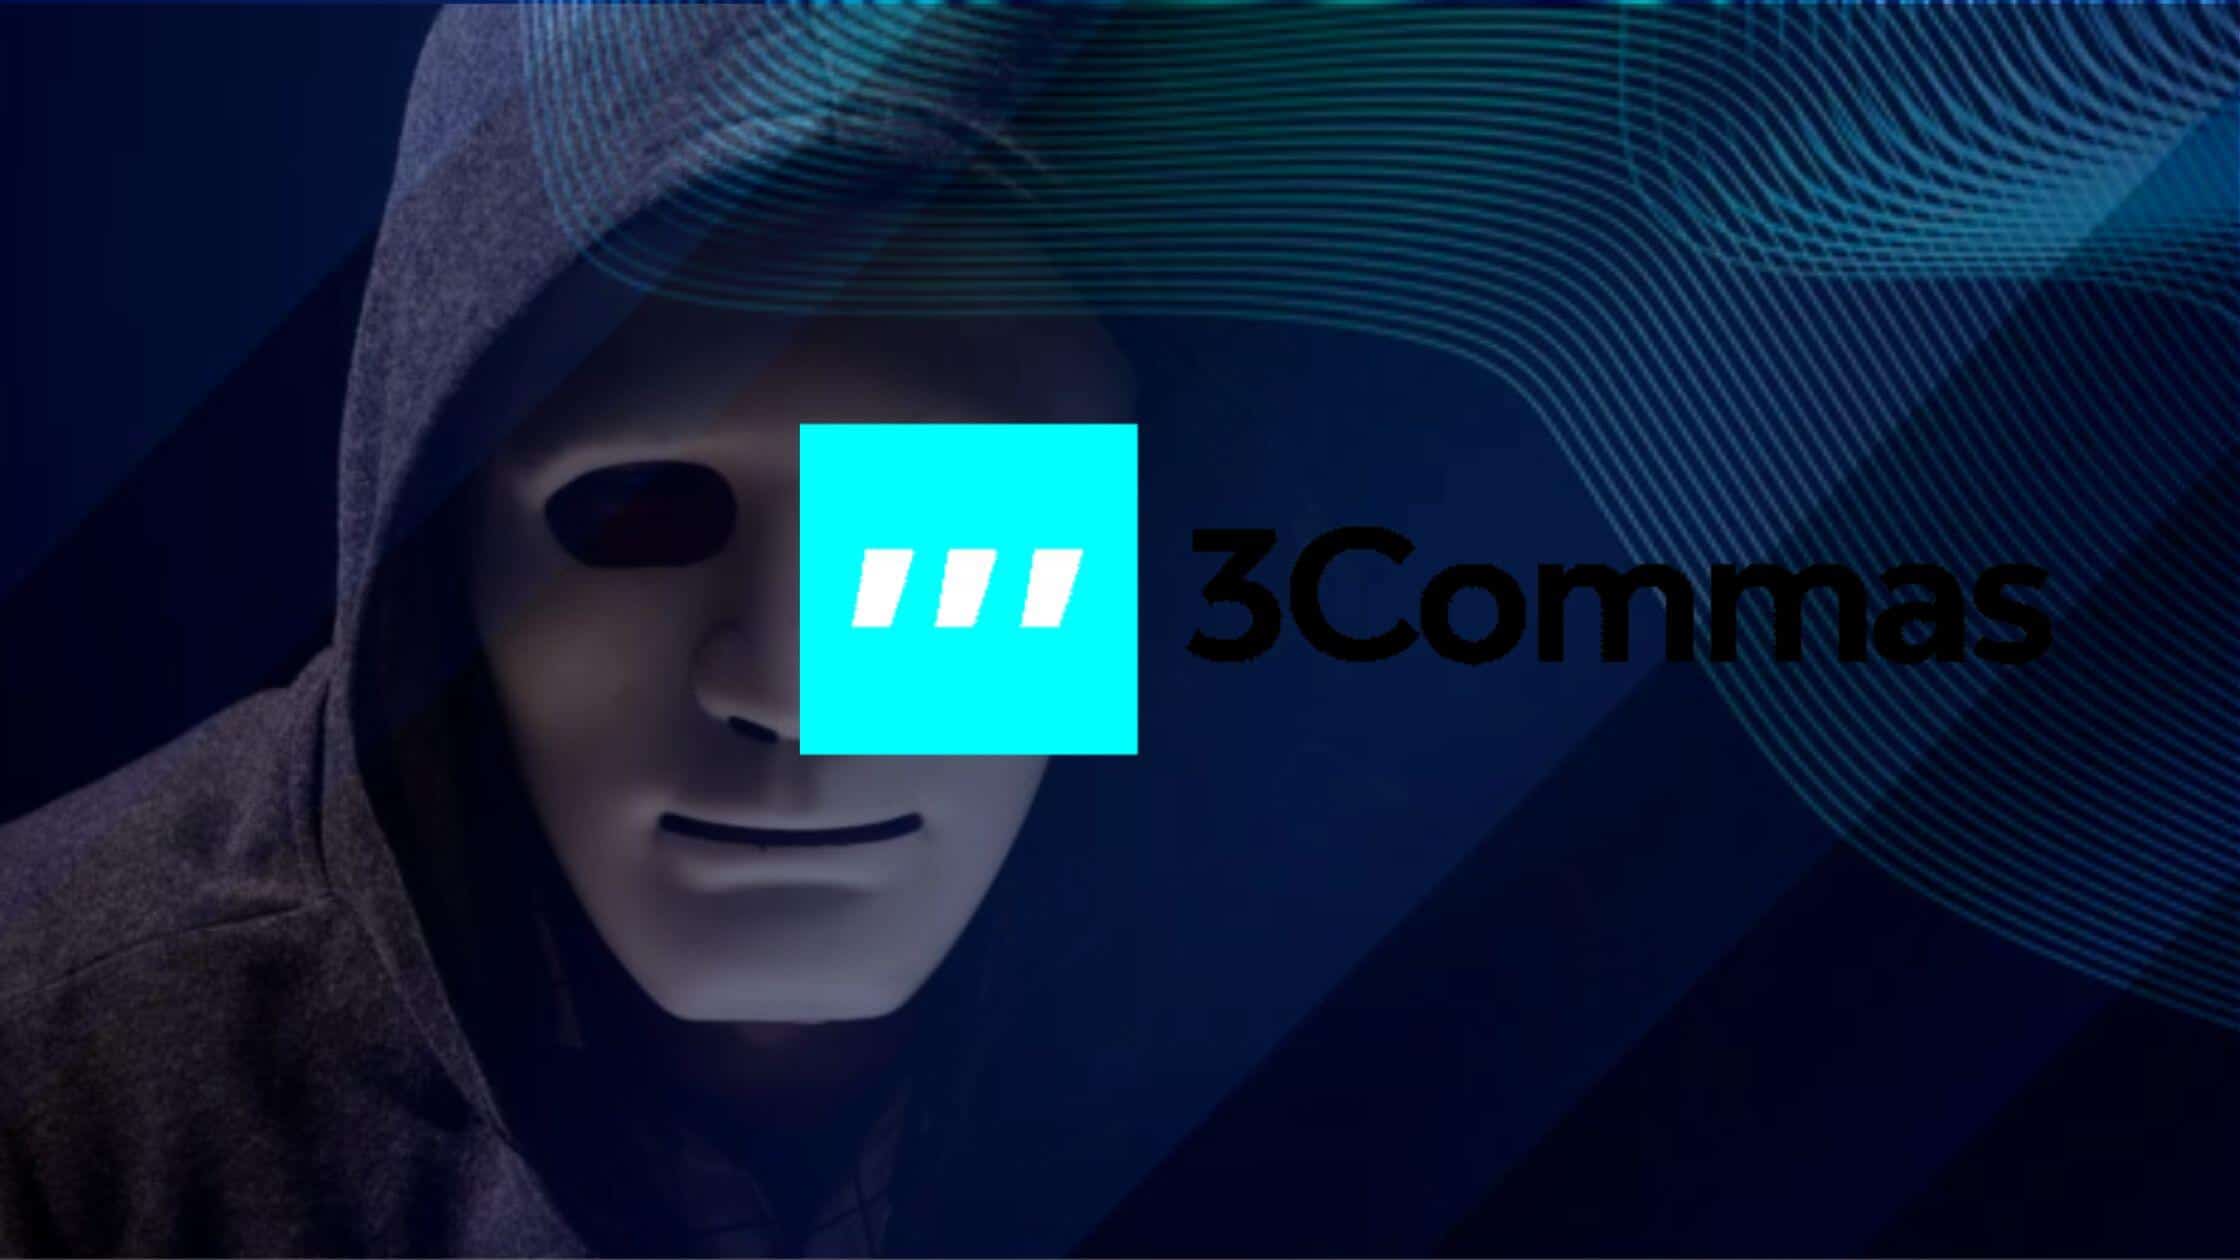 3Commas CEO Confirms API Key Leak After Receiving A Warning From CZ